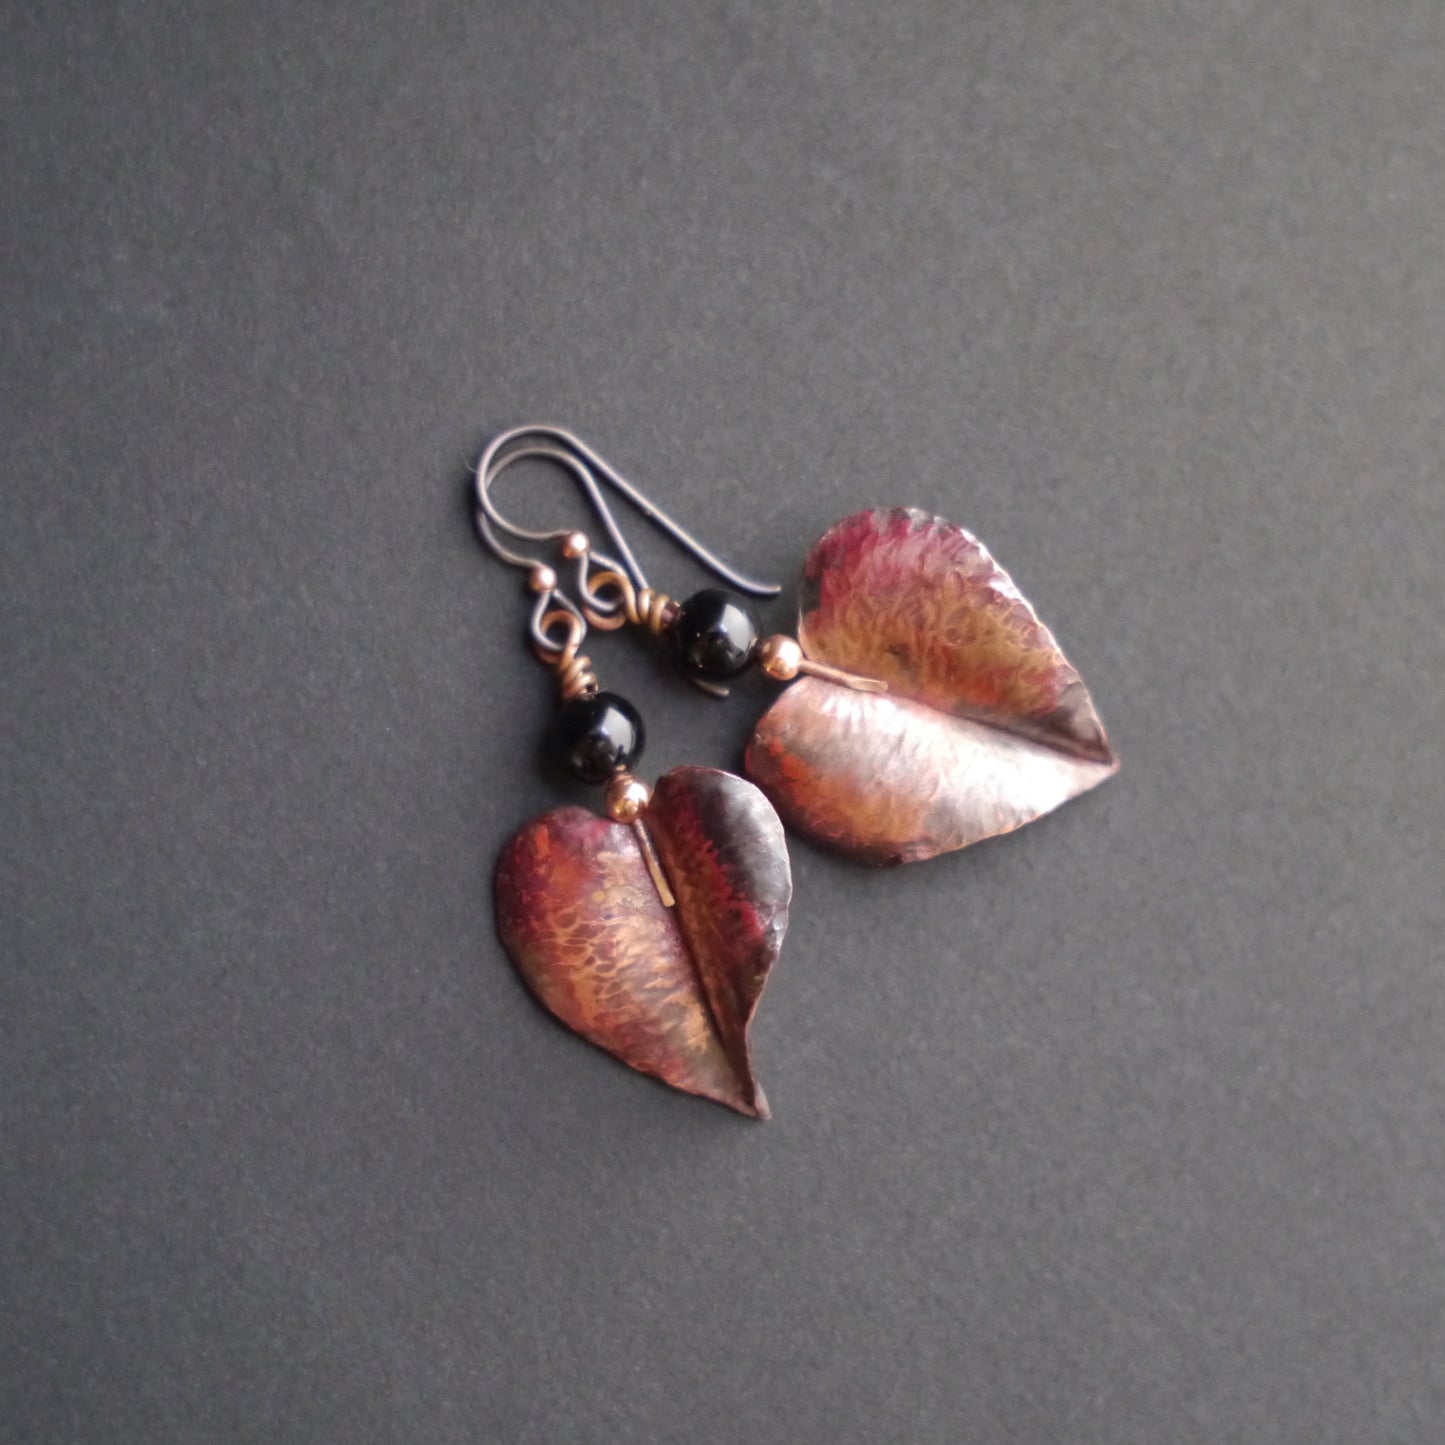 Crimson Leaf Fold-formed Earrings with Onyx Beads